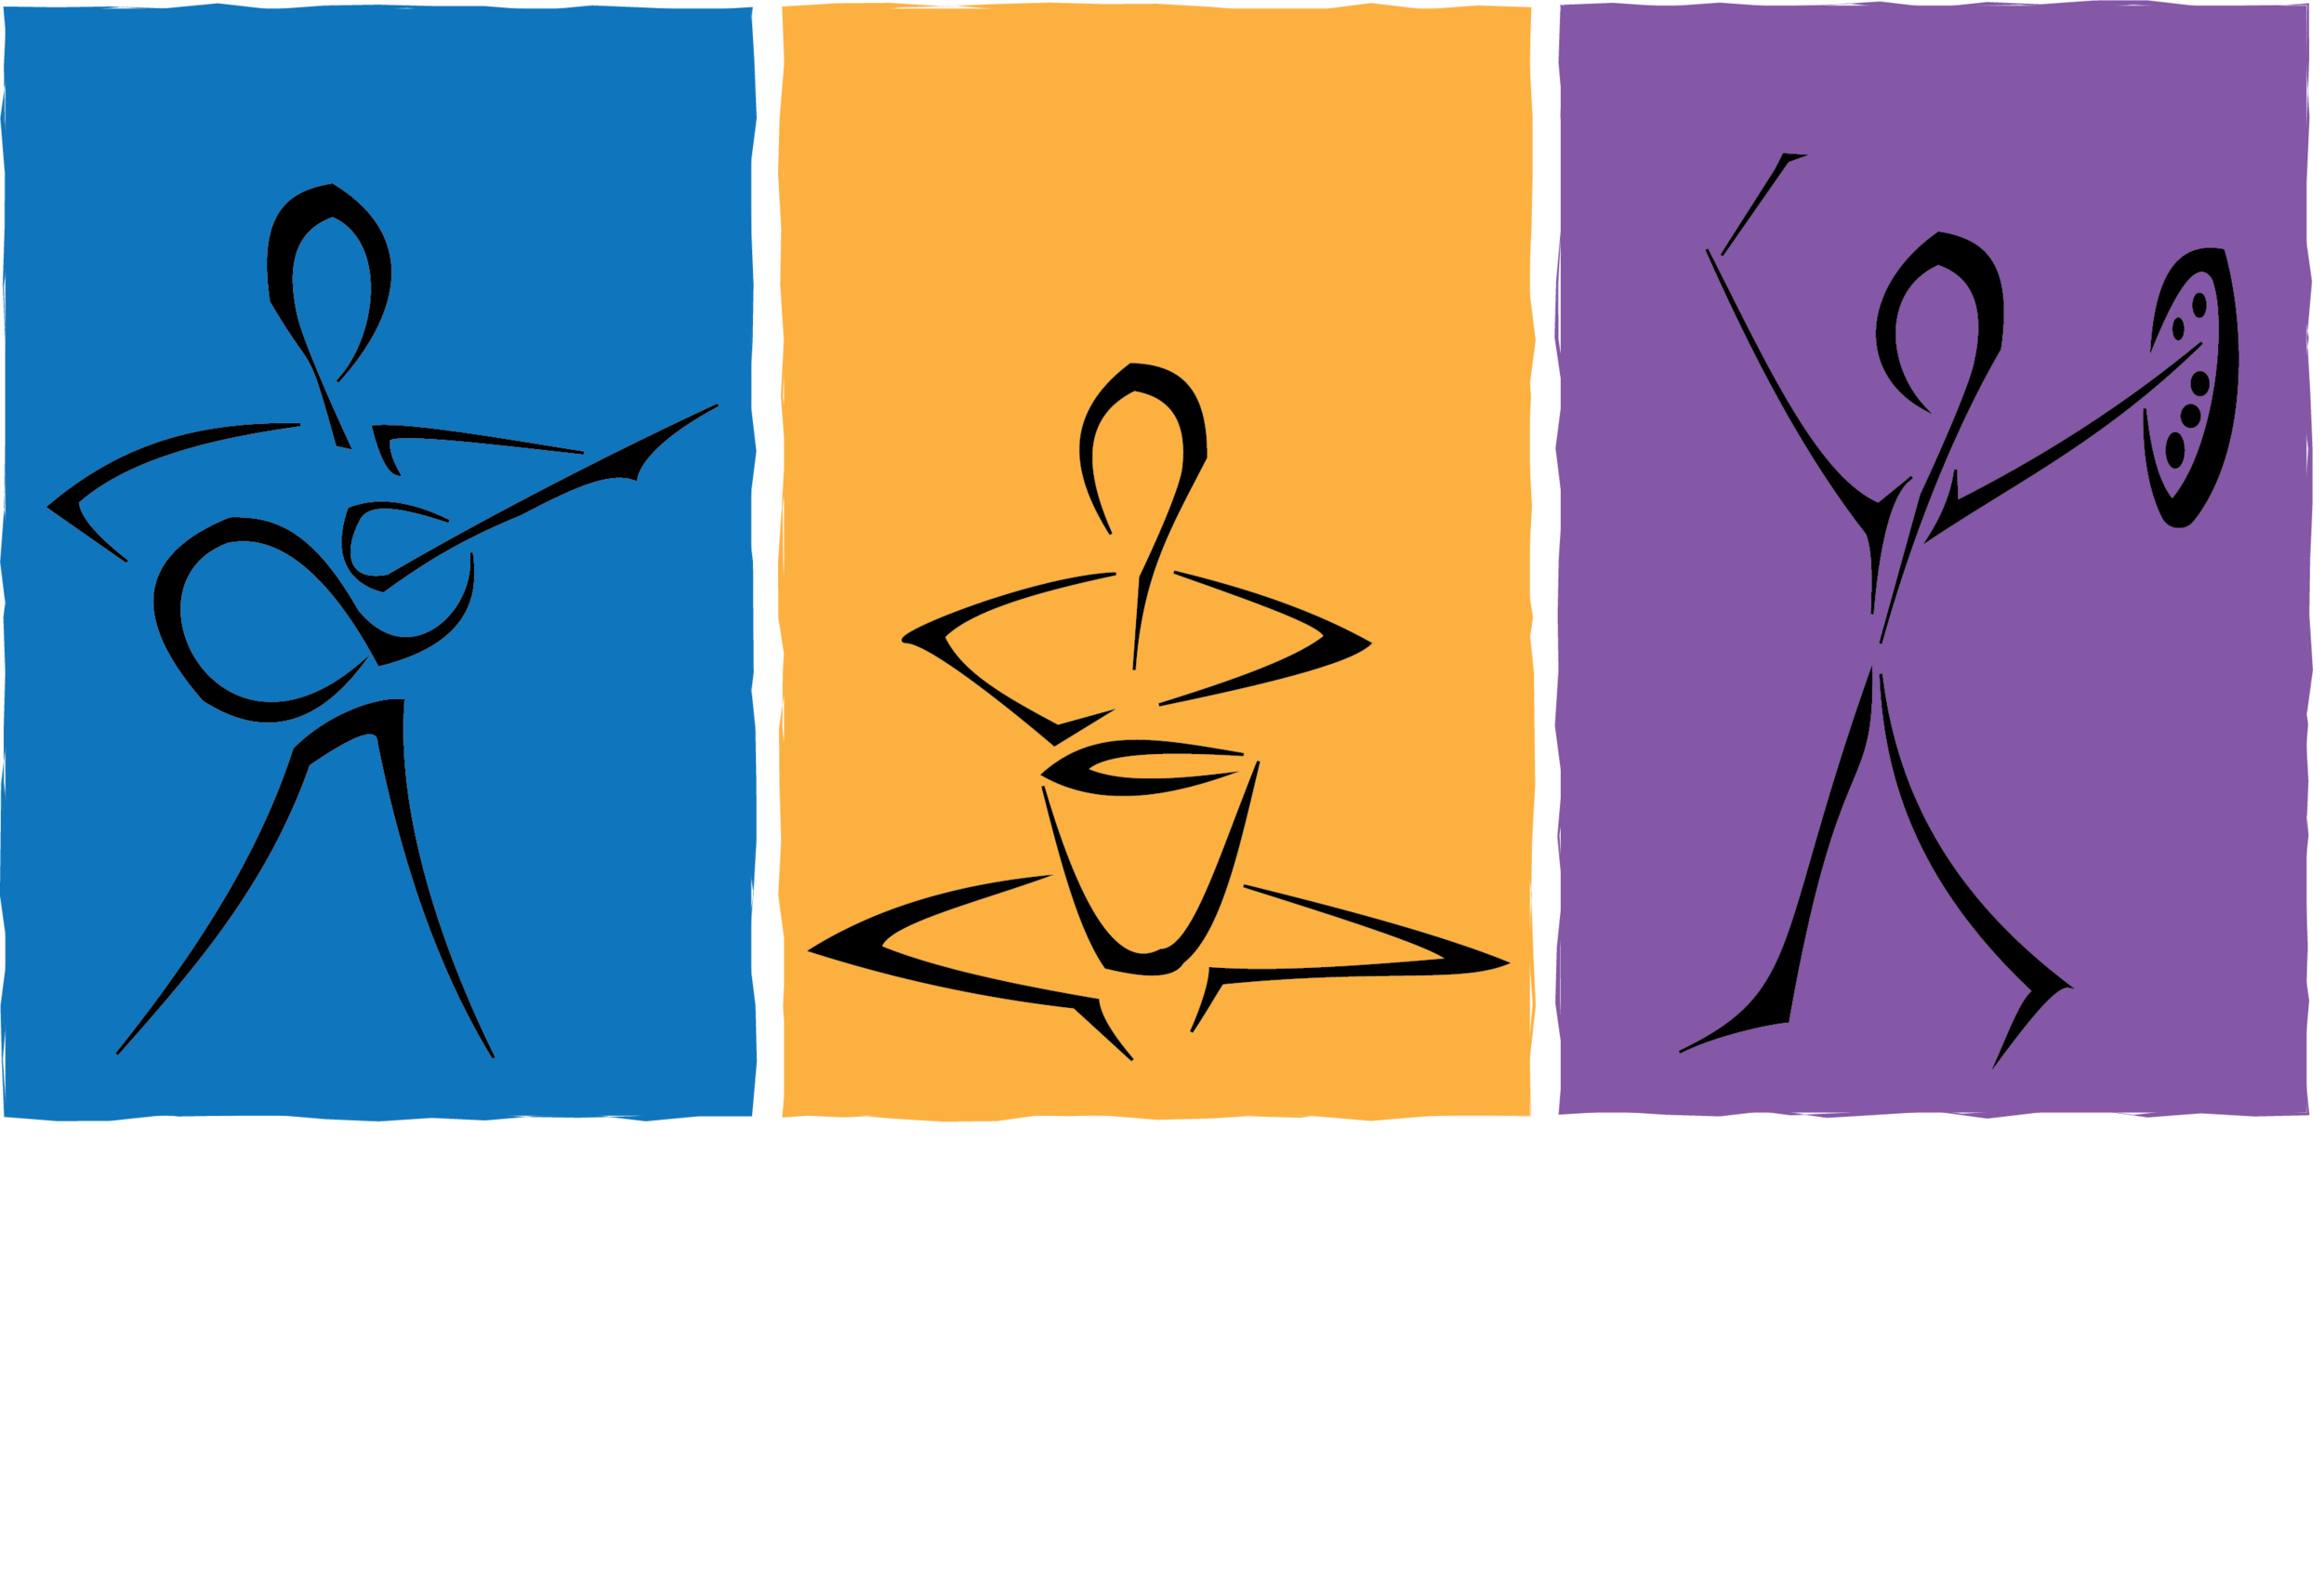 UofL Health - UofL Hospital - Art therapy students from University